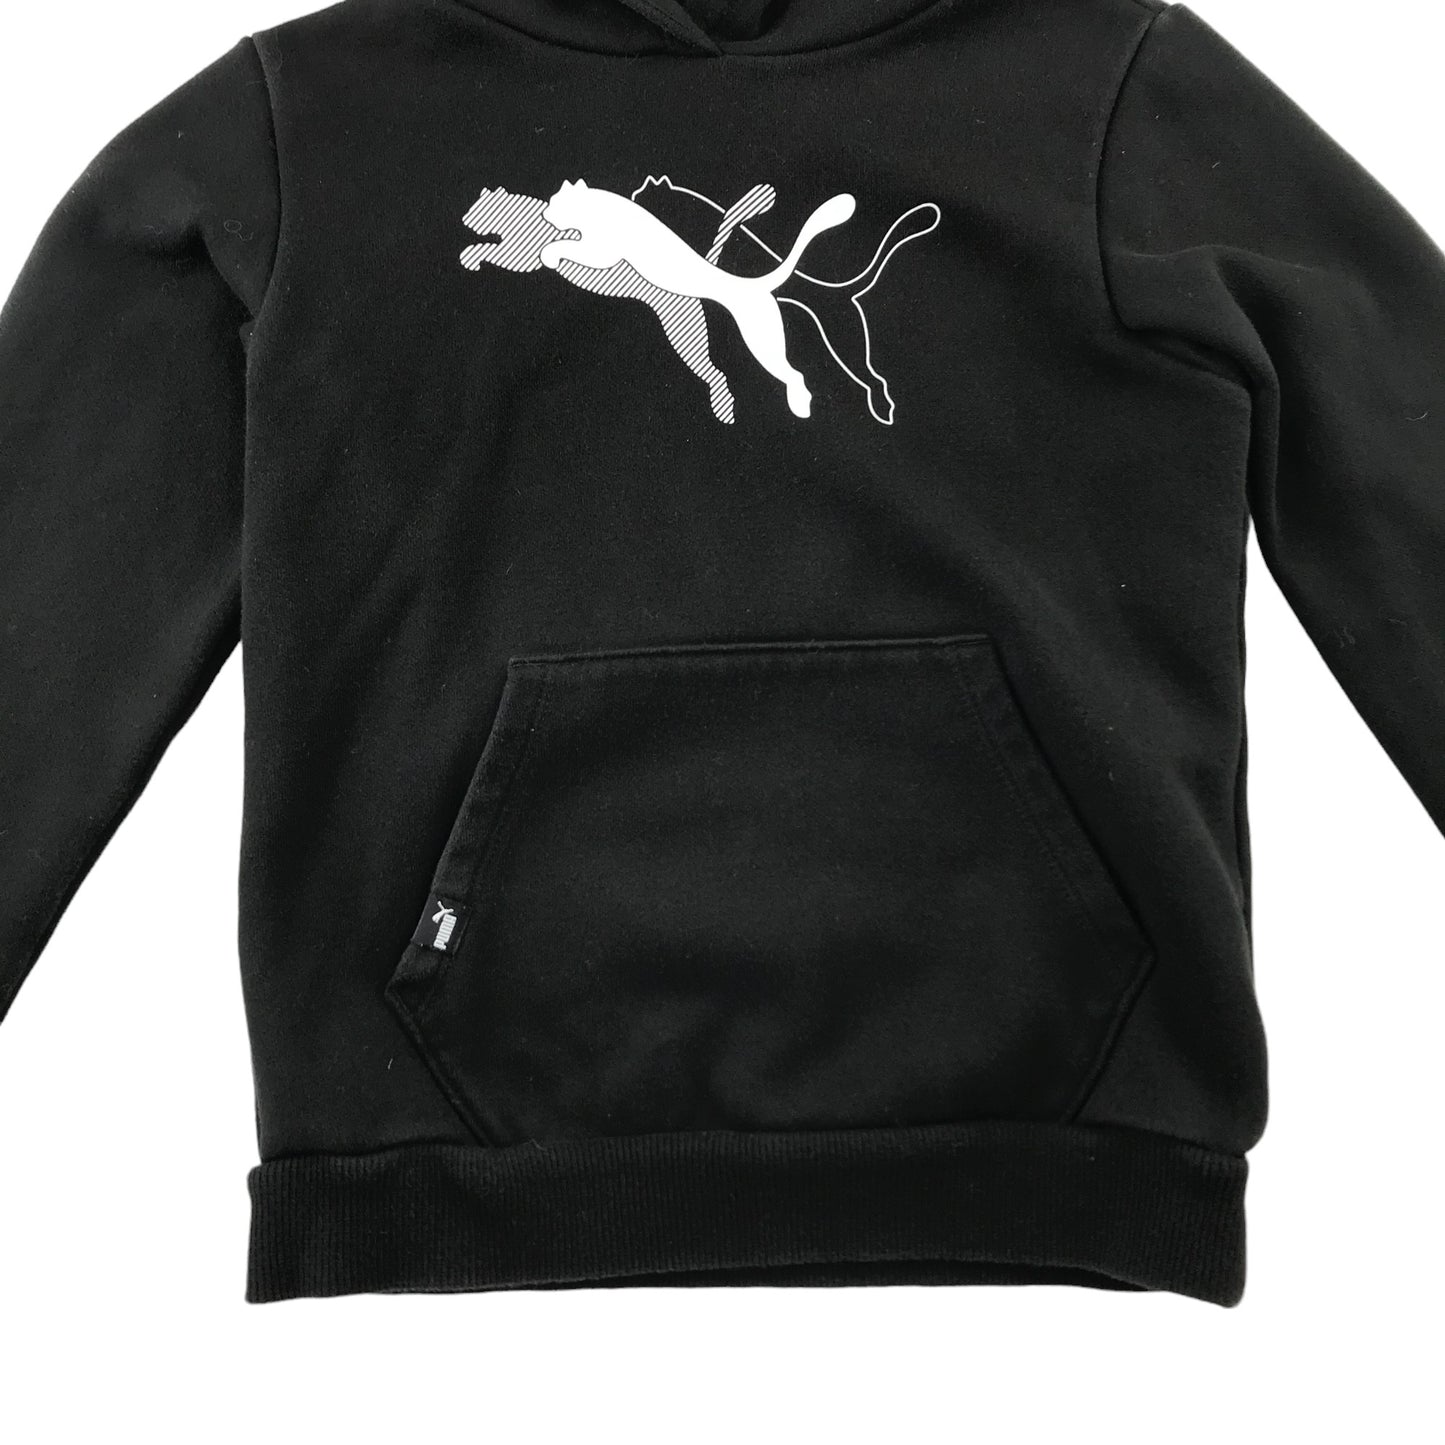 Puma hoodie 6-8 years black classic pullover with graphic logo